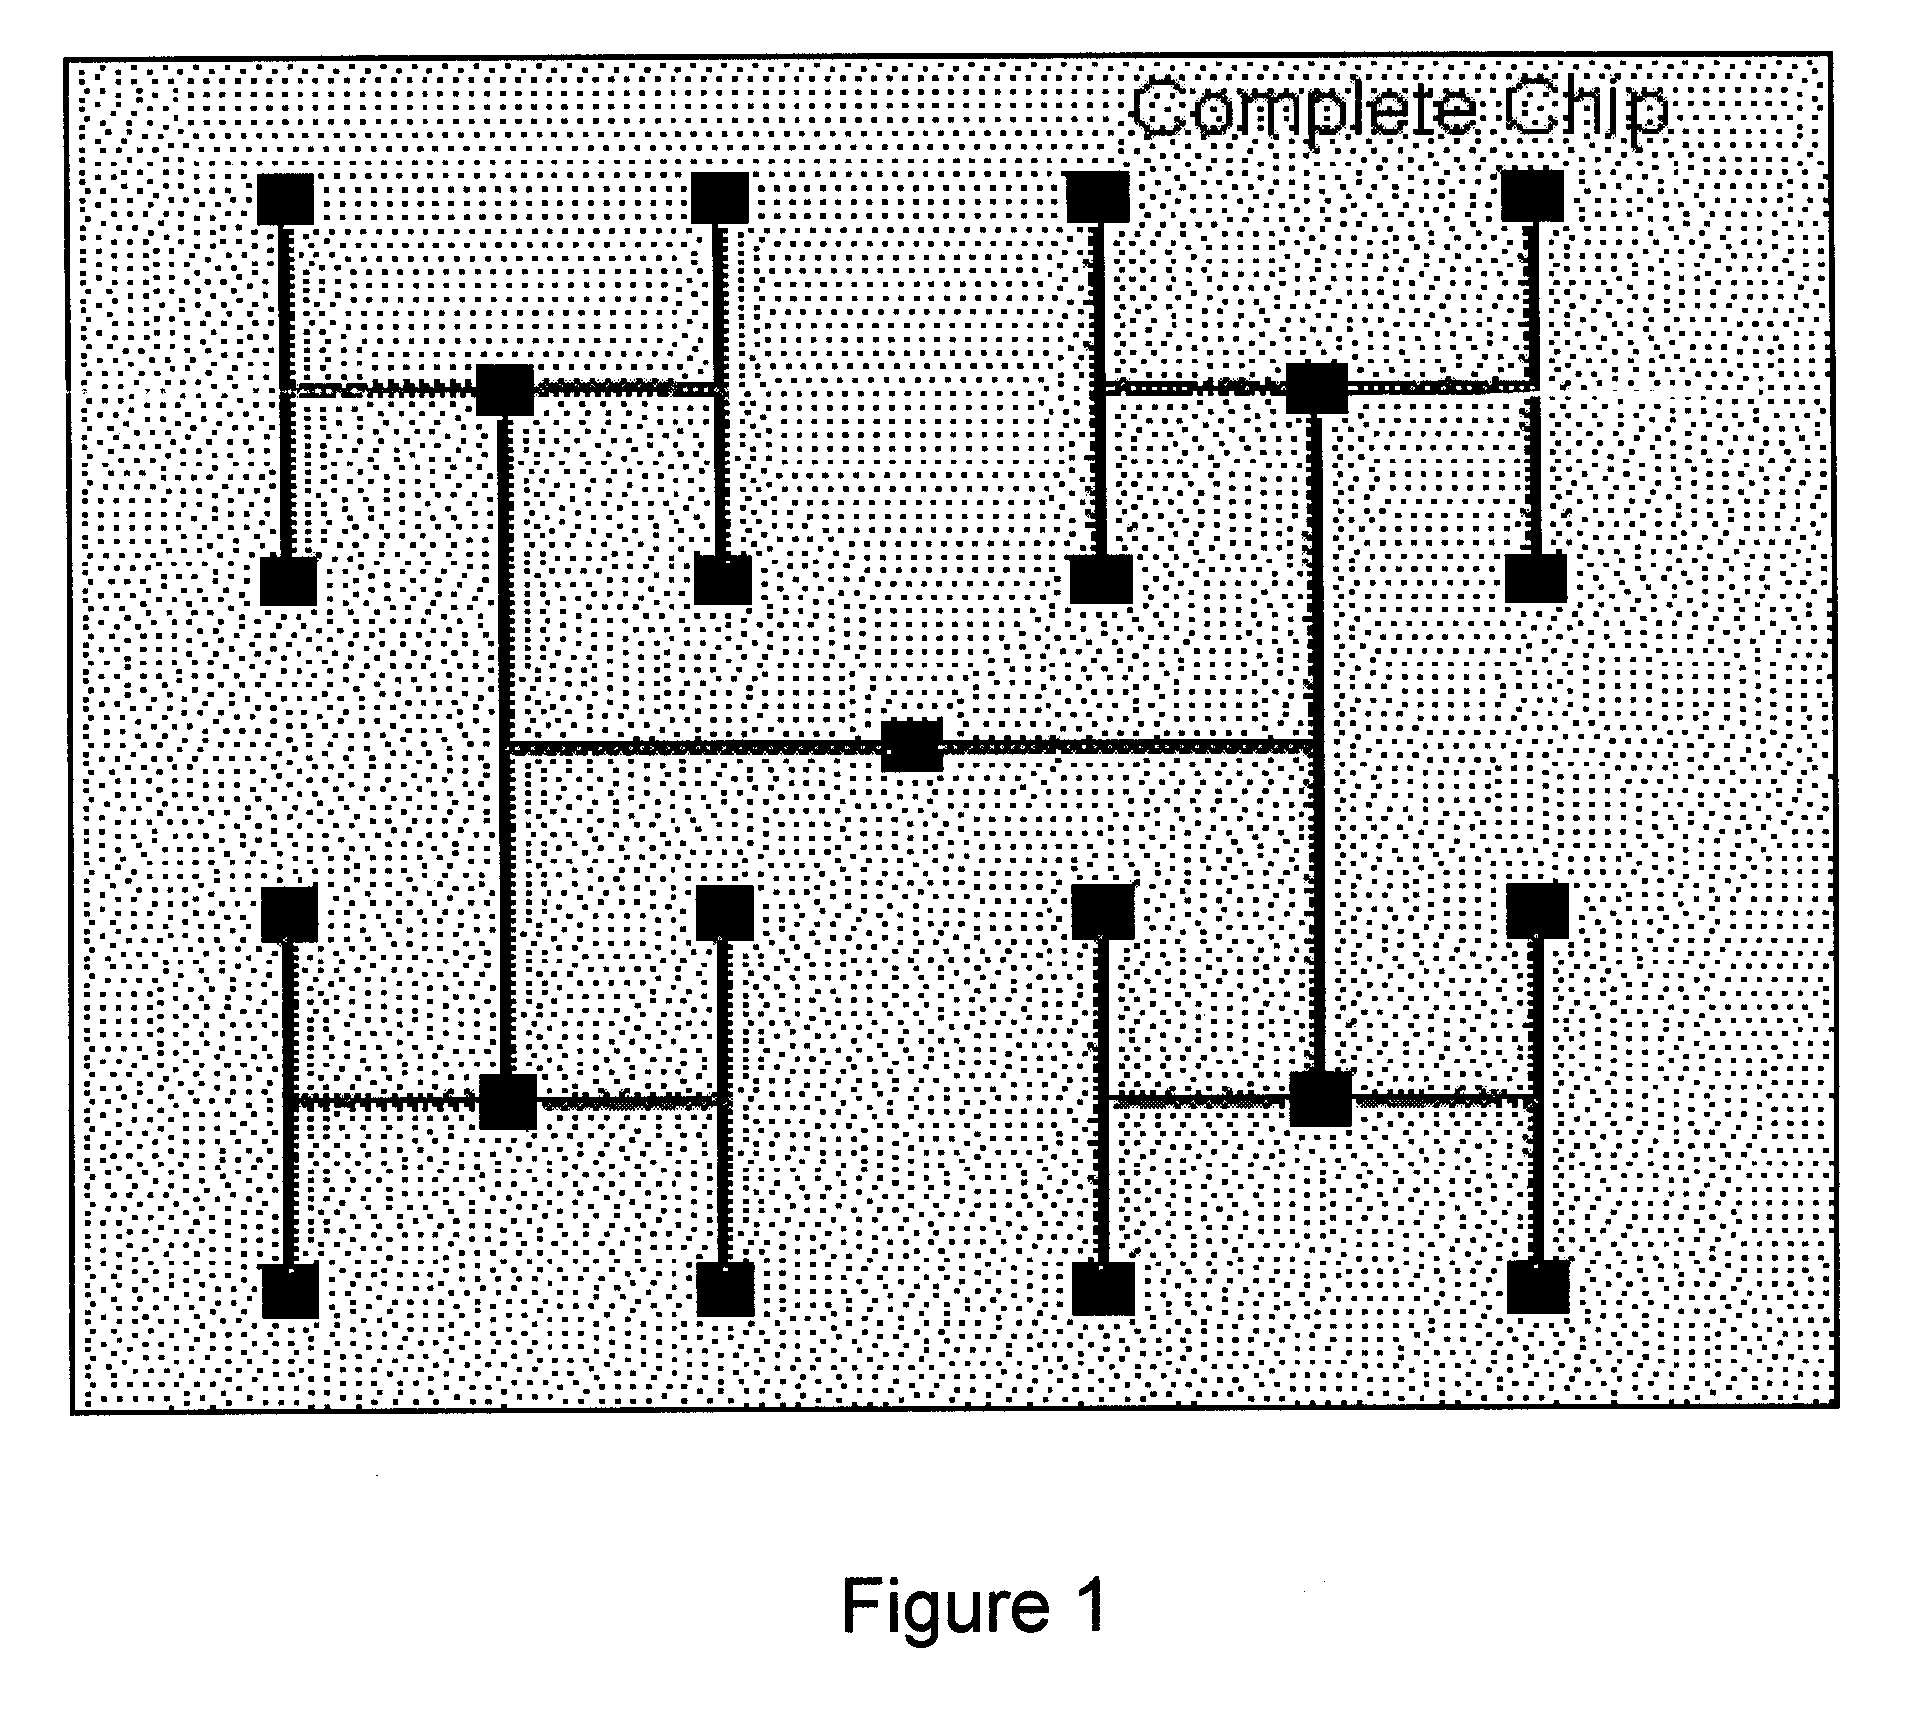 Method of generating wiring routes with matching delay in the presence of process variation